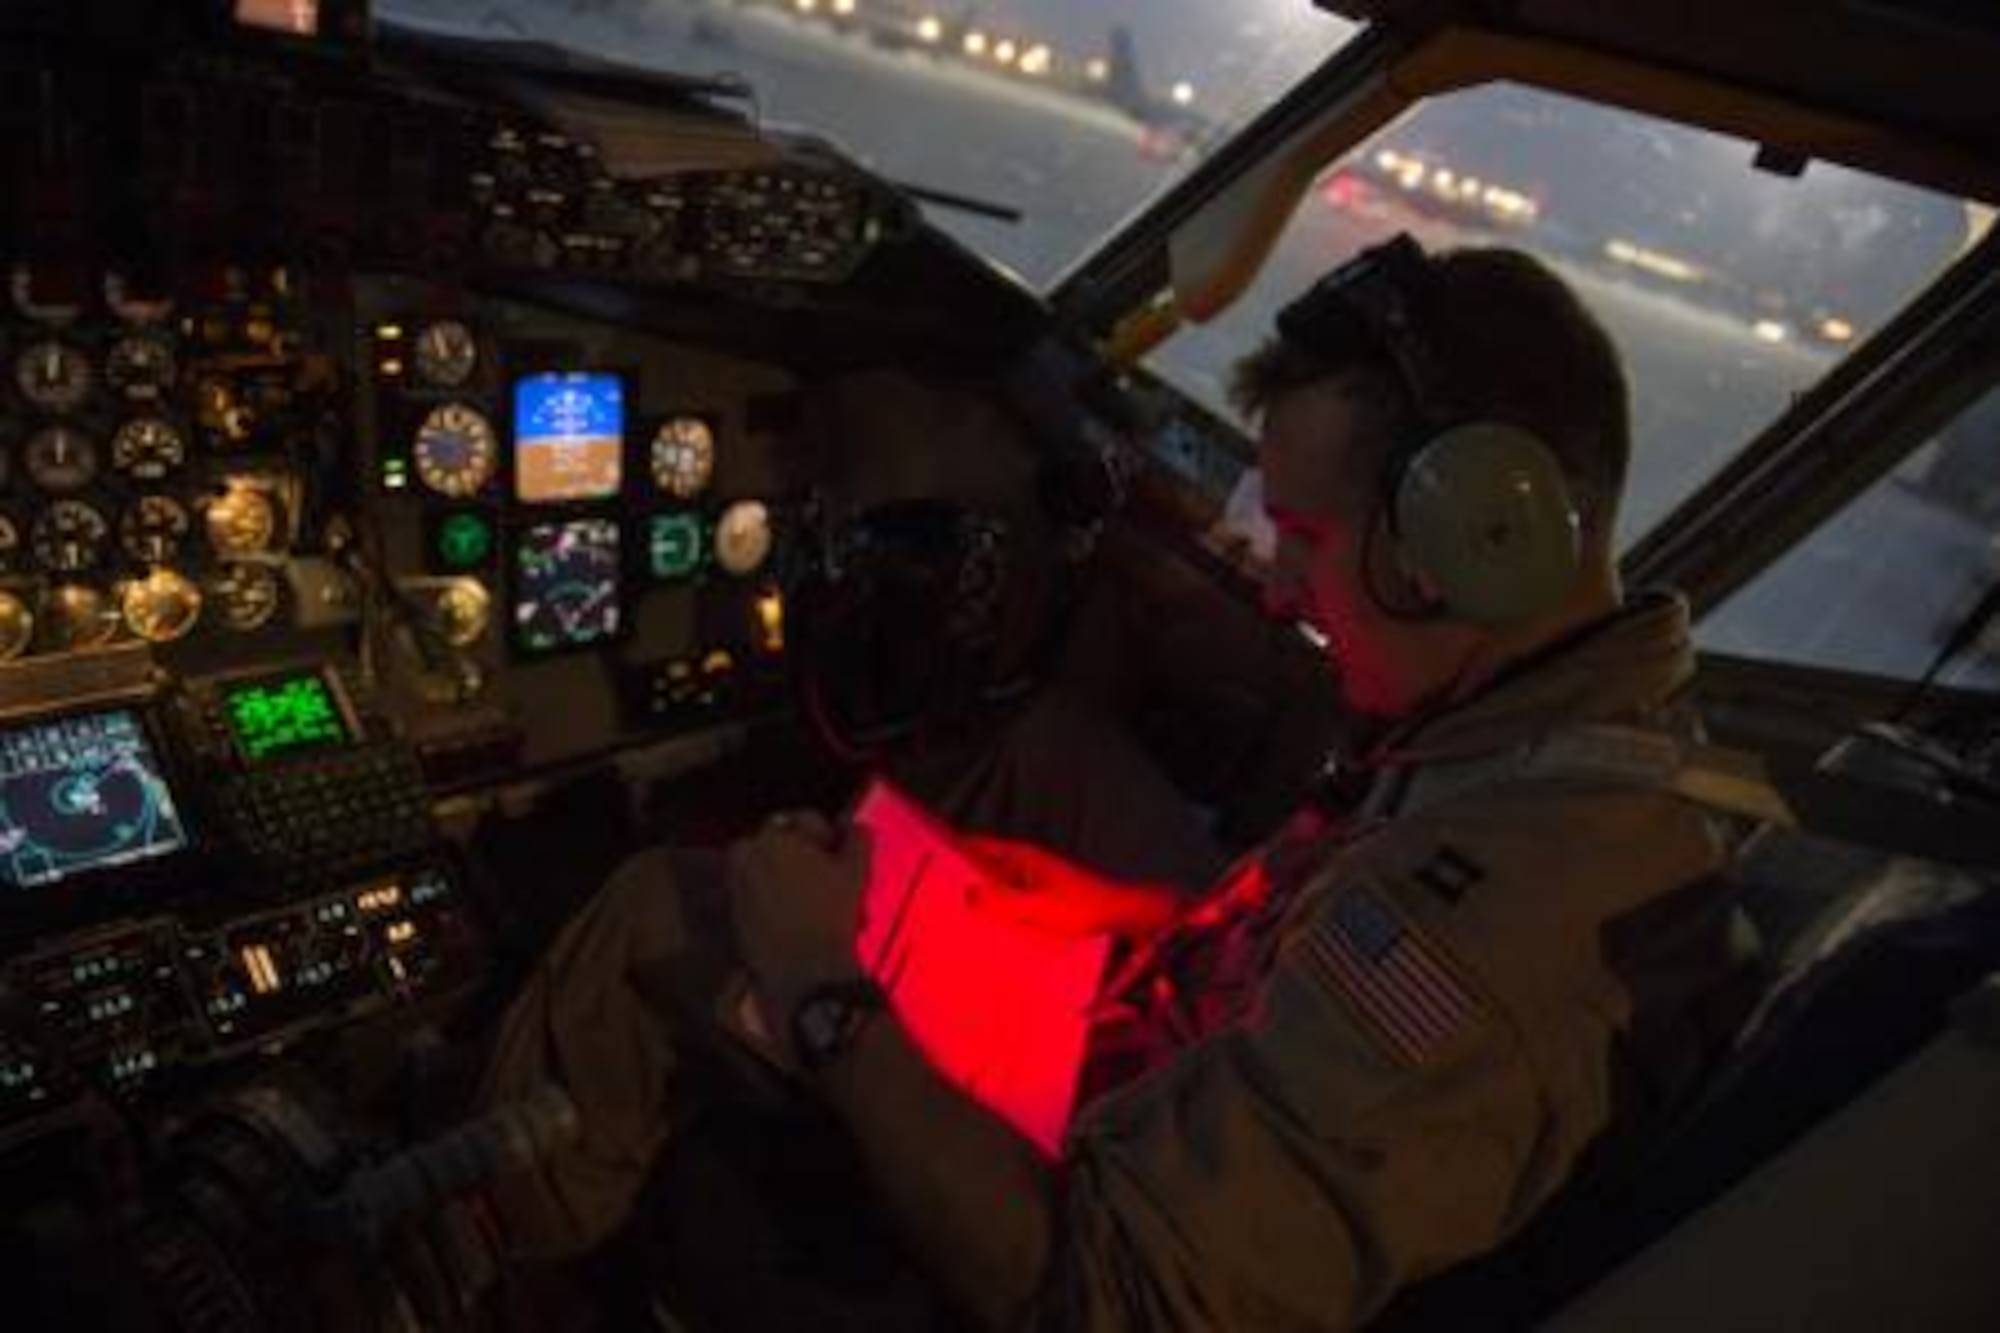 Capt. Trent Parker, 340th Expeditionary Air Refueling Squadron, KC-135 Stratotanker pilot, reads a pre-flight checklist prior to an in-air refueling mission over Iraq, Aug. 12, 2014. As the co-pilot for the mission, Parker is responsible for assisting the aircraft commander to complete the mission, takeoffs and landings. The aircrew is scheduled to offload more than 40,000 gallons of fuel to fighter aircraft completing missions in Iraq. (U.S. Air Force photo by Staff Sgt. Vernon Young Jr.)
